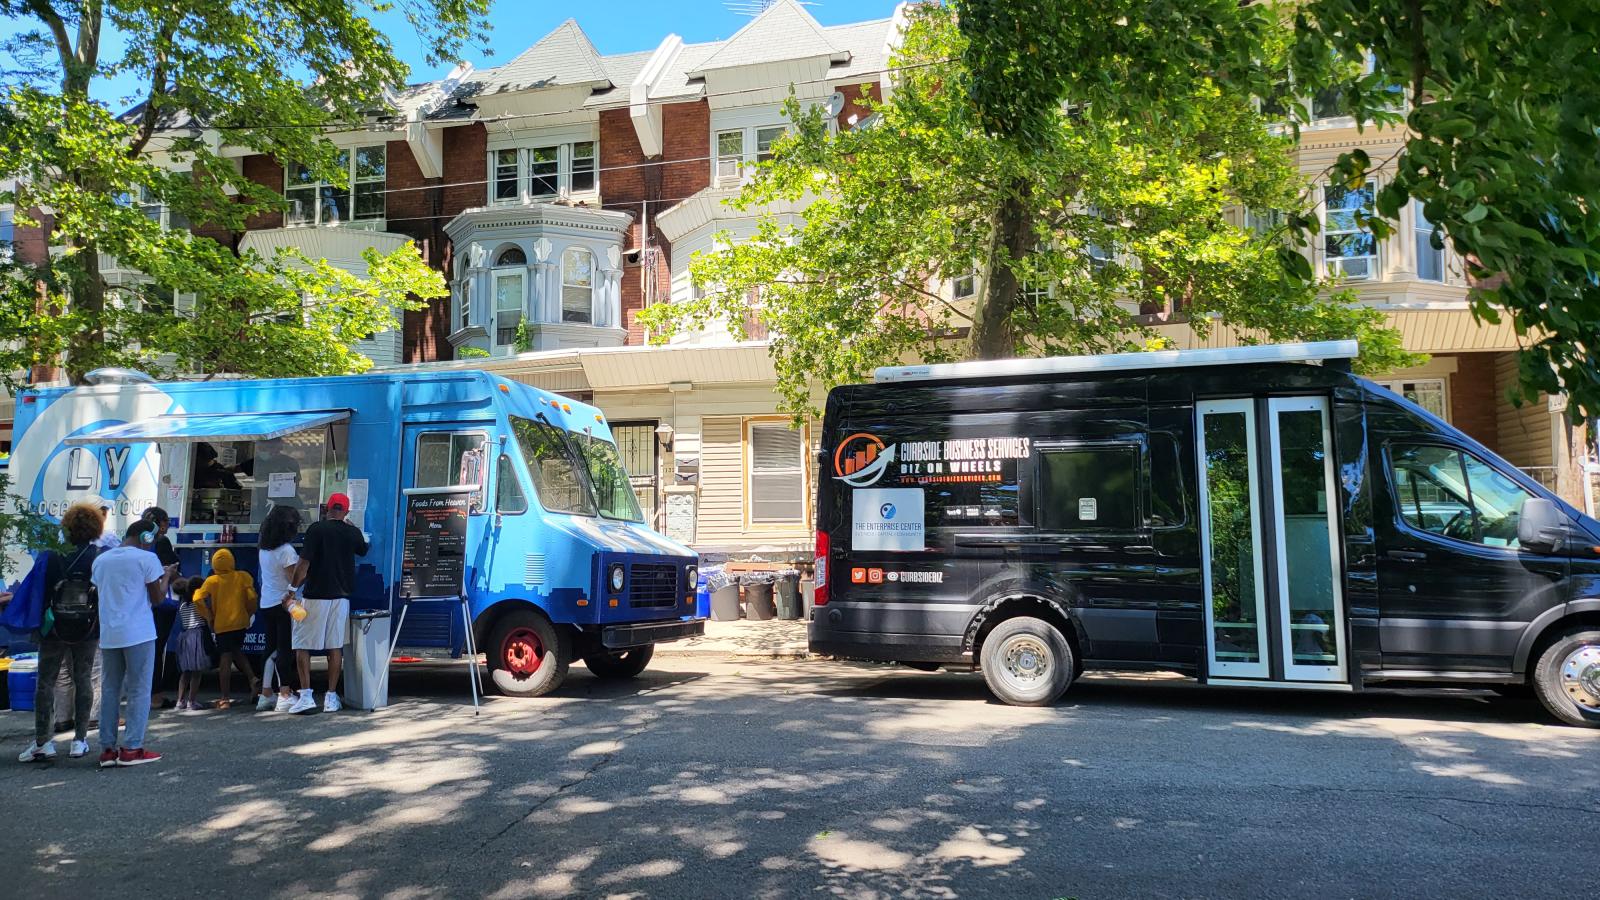 The Enterprise Center food truck and curbside vehicle